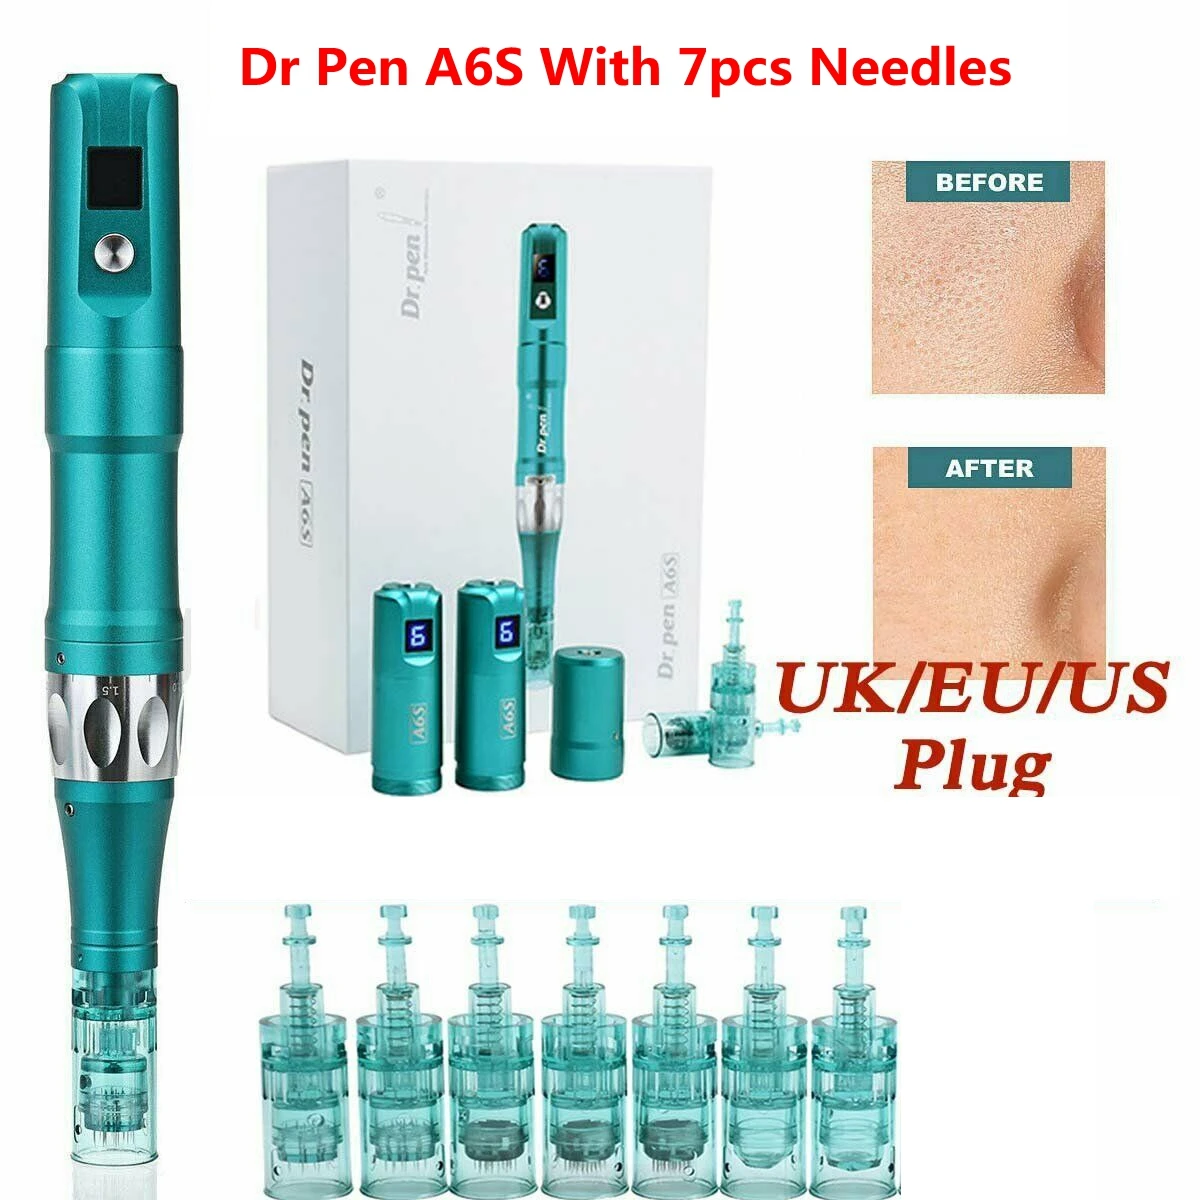 Dr Pen A6S With 7pcs Needles Wireless Microneedling Professional Electric Derma pen Auto Micro Mesotherapy Beauty Machine